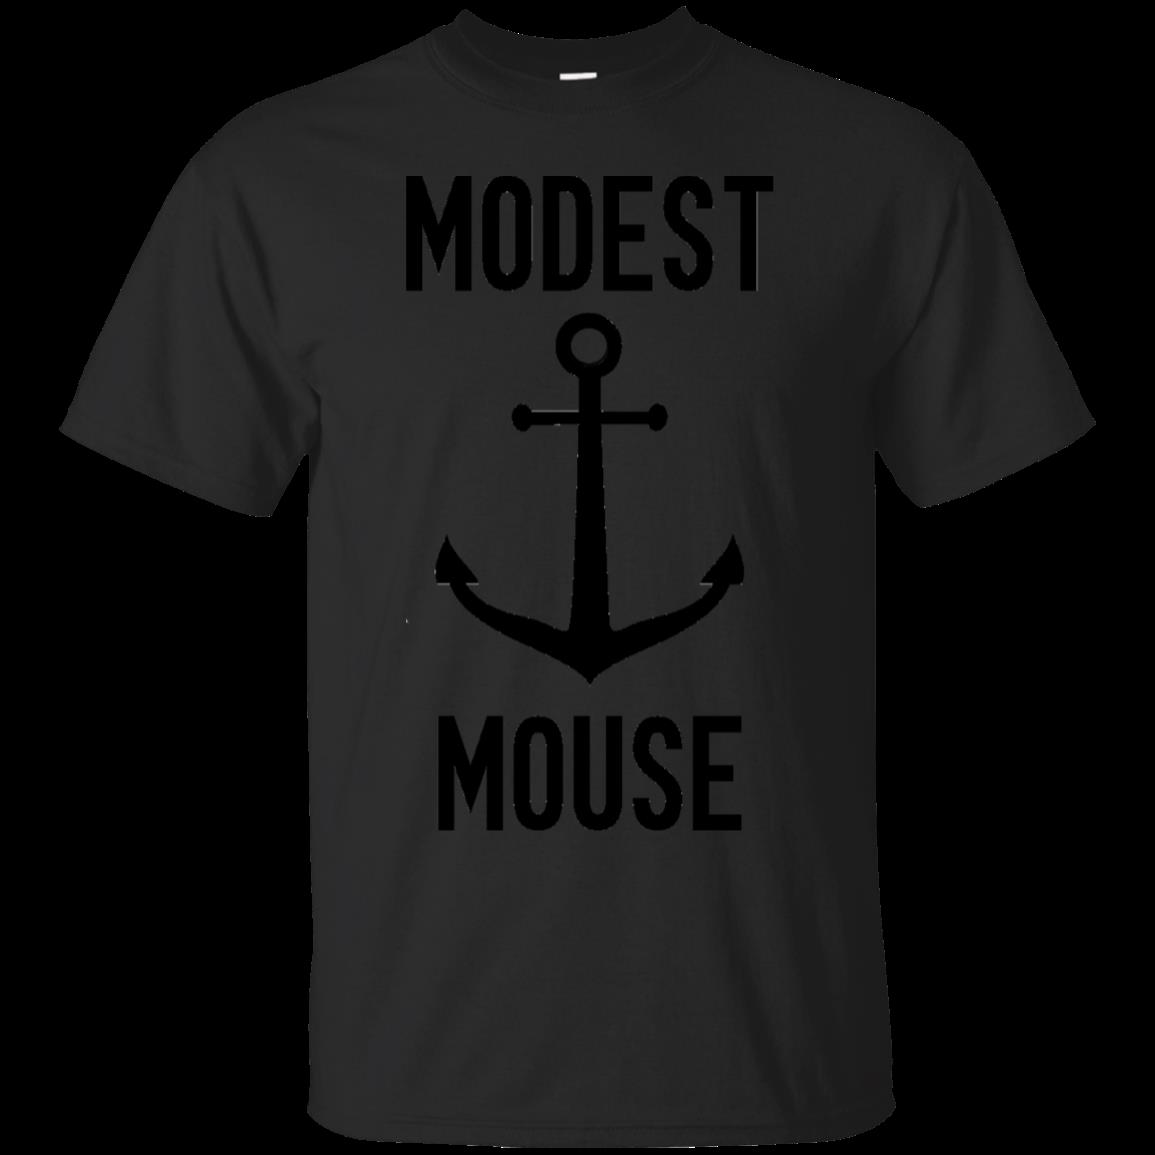 Modest Mouse Shirts